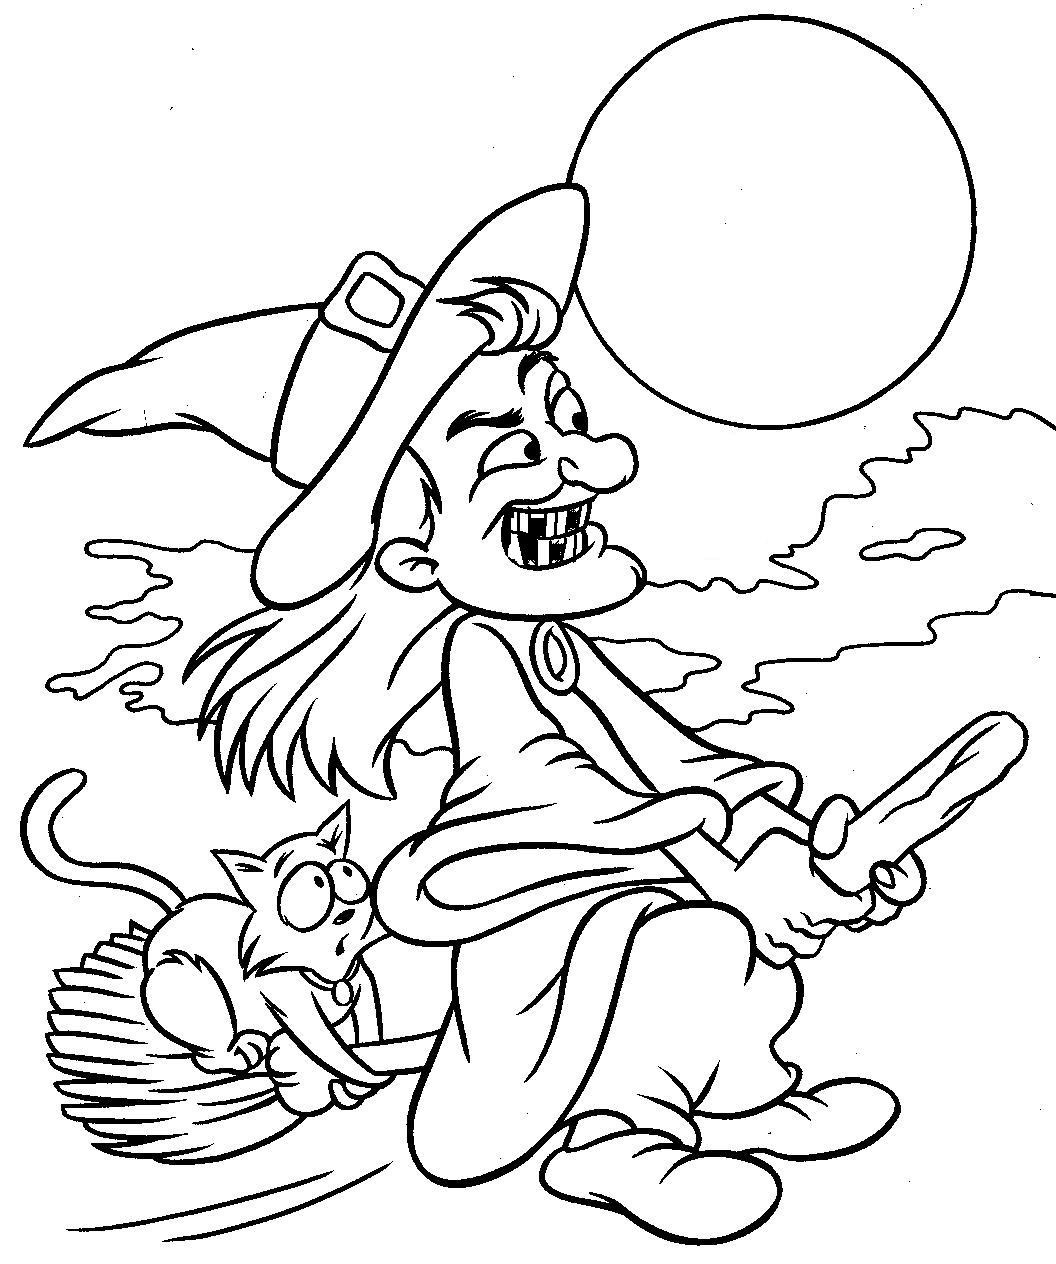 Printable Coloring Pages Halloween
 Coloring